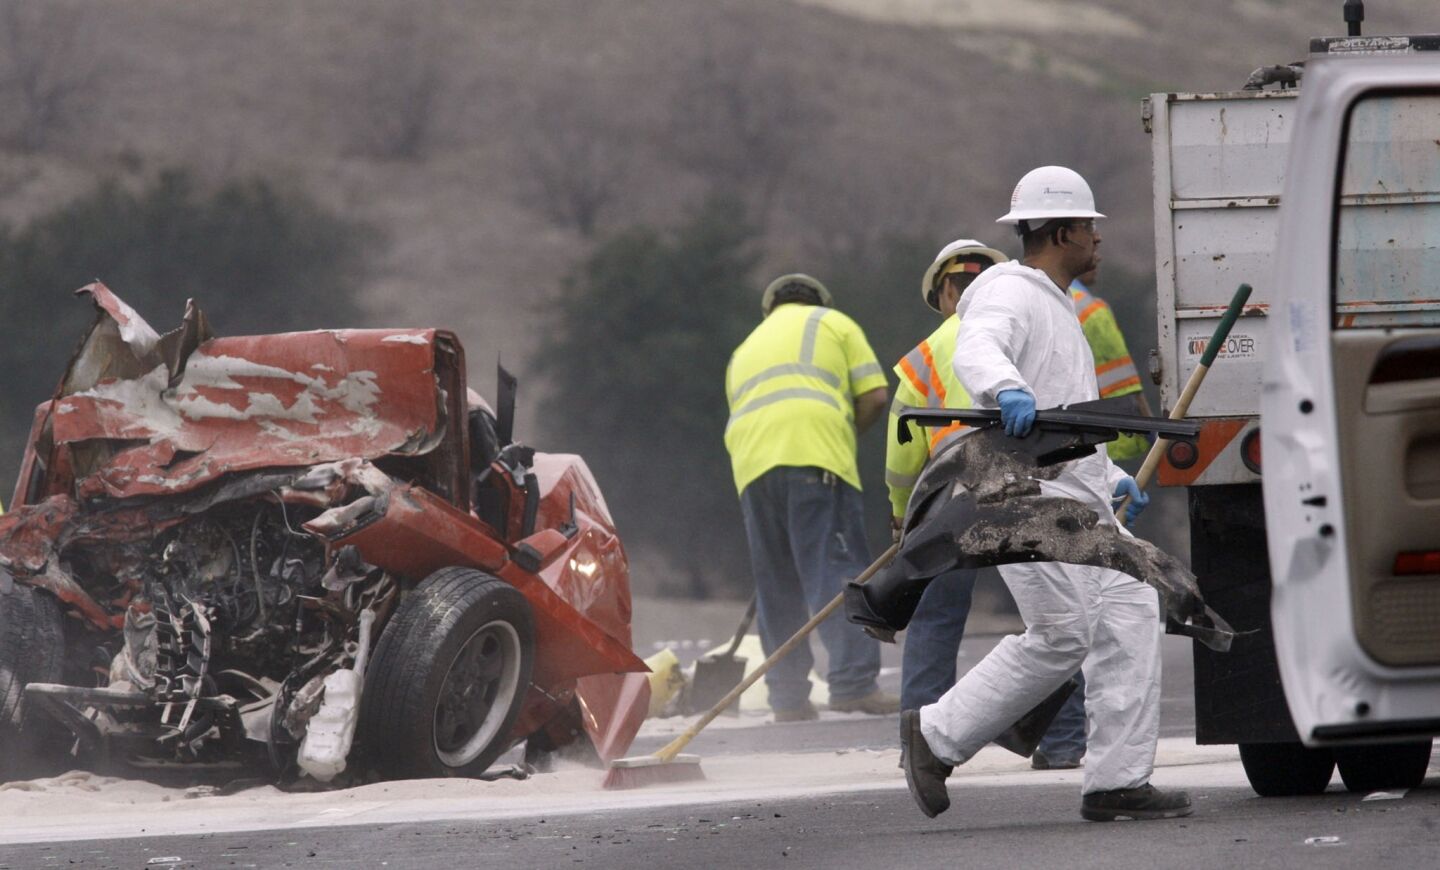 A worker removes debris from the wreckage of a car crash on the westbound 60 Freeway in Diamond Bar on Sunday.